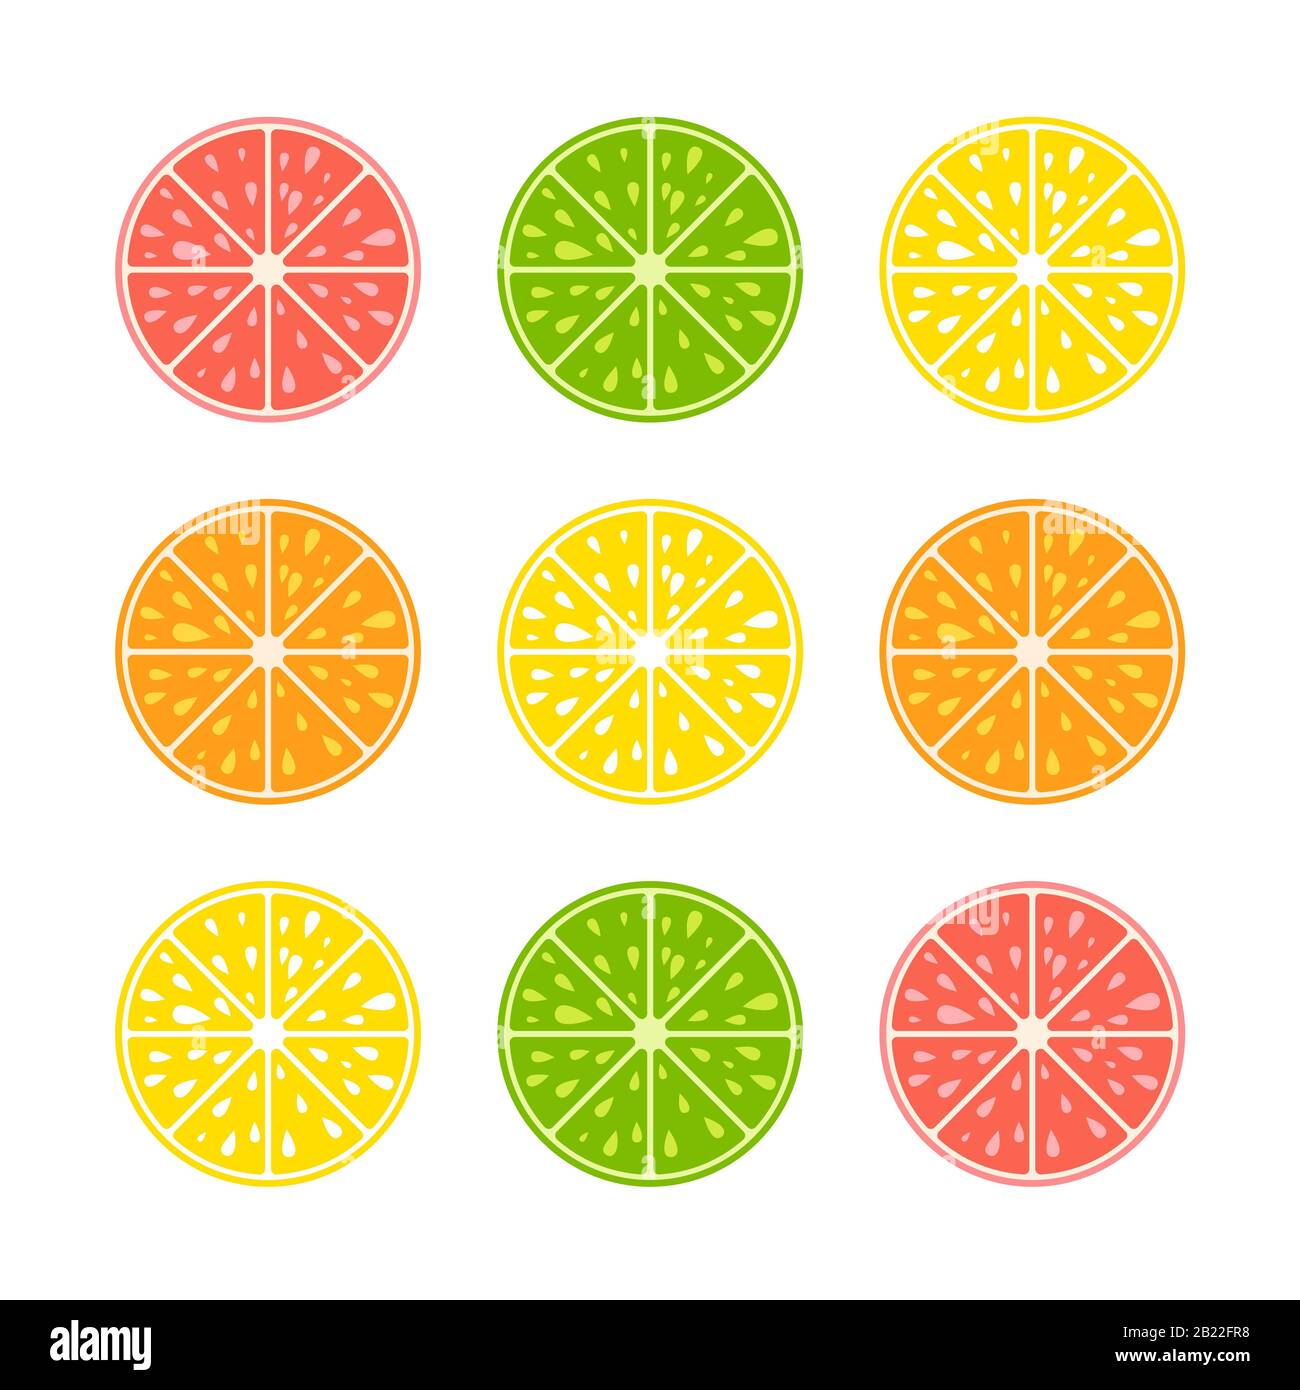 Set of colored isolated halves of mouth-watering fruits on a white background. Juicy, bright, delicious tropical food. Lime, lemon, grapefruit, orange Stock Vector